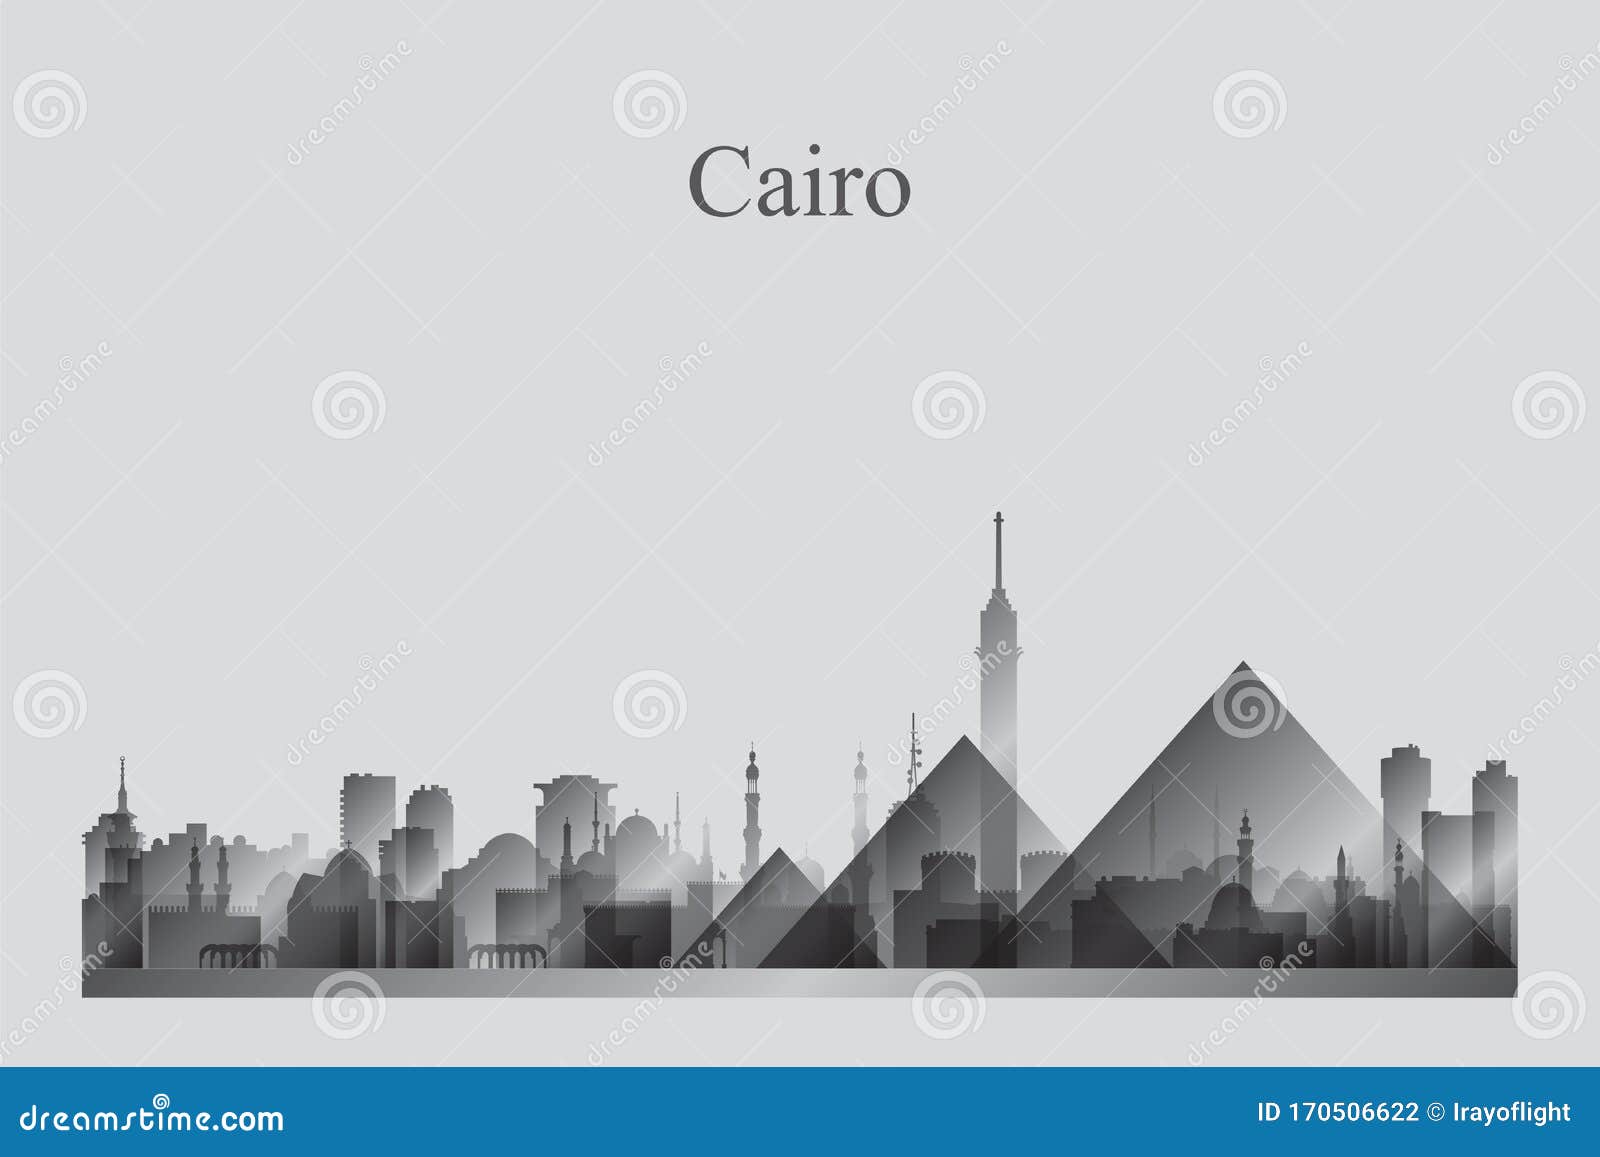 cairo city skyline silhouette in a grayscale